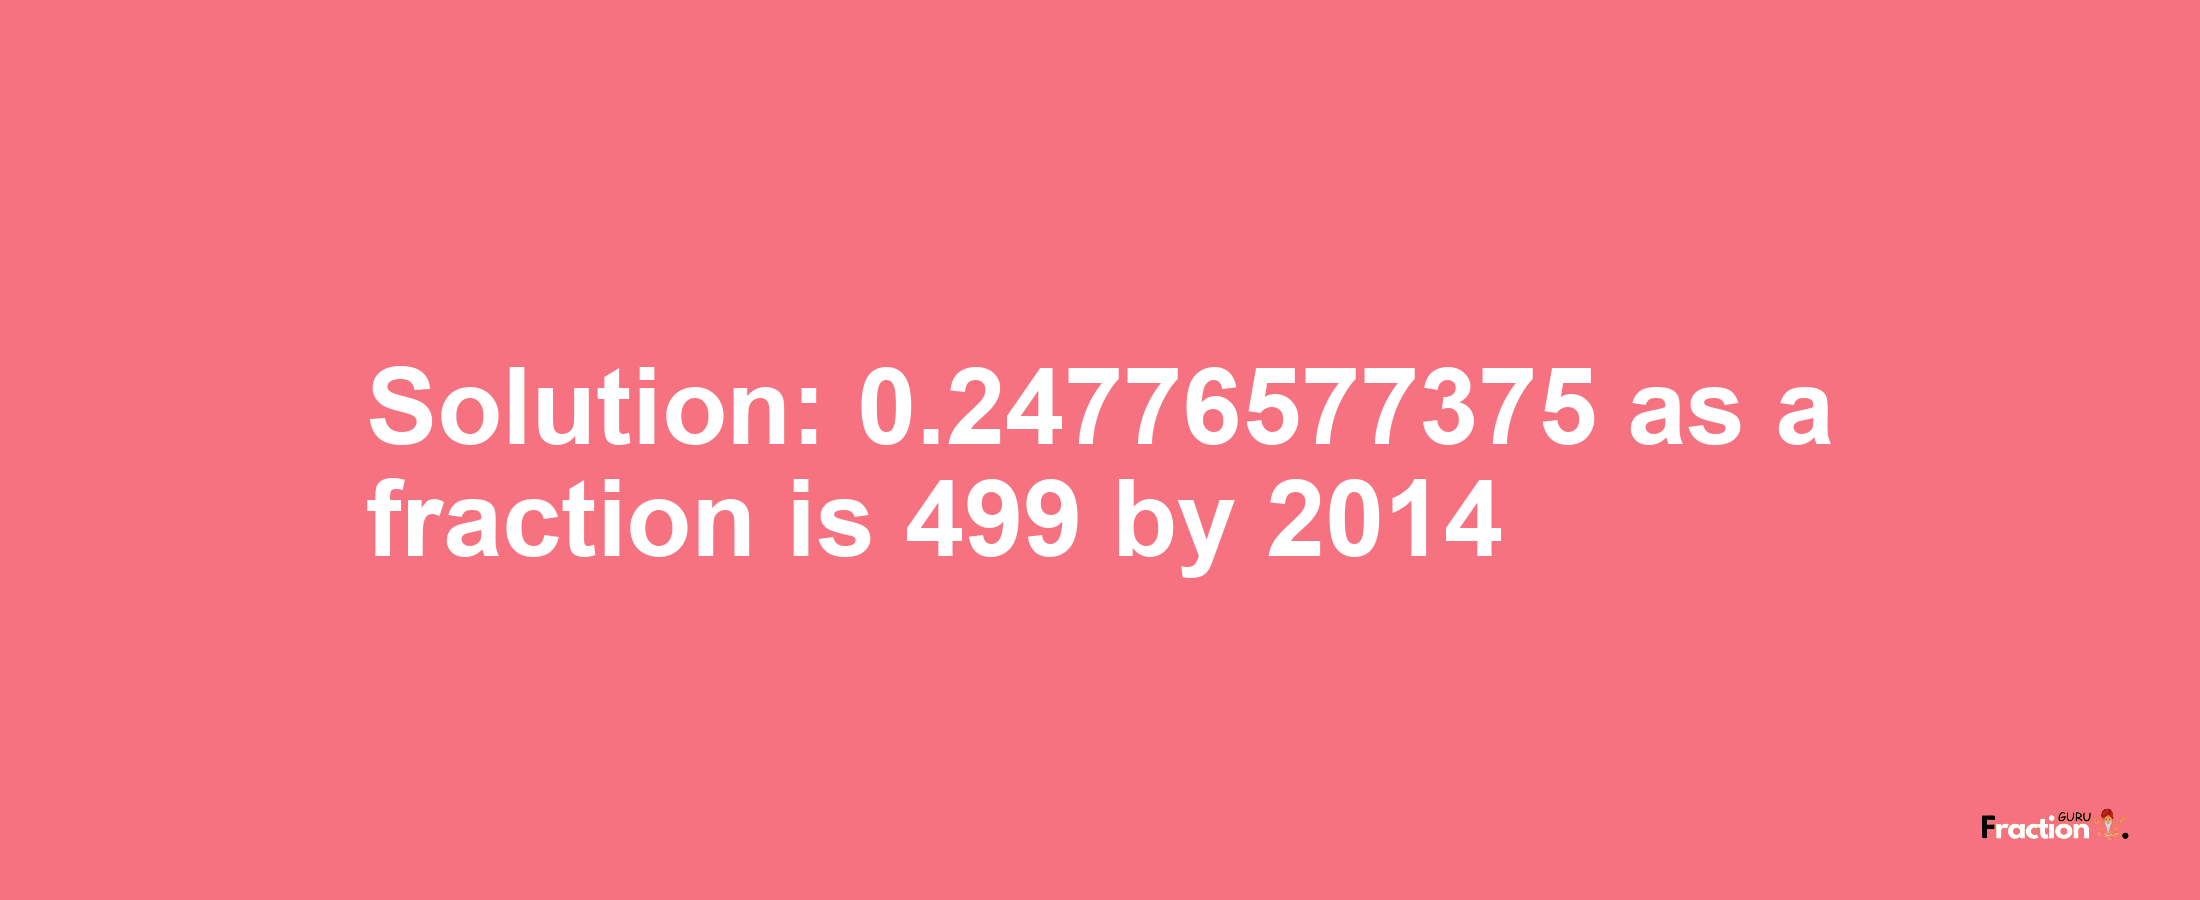 Solution:0.24776577375 as a fraction is 499/2014